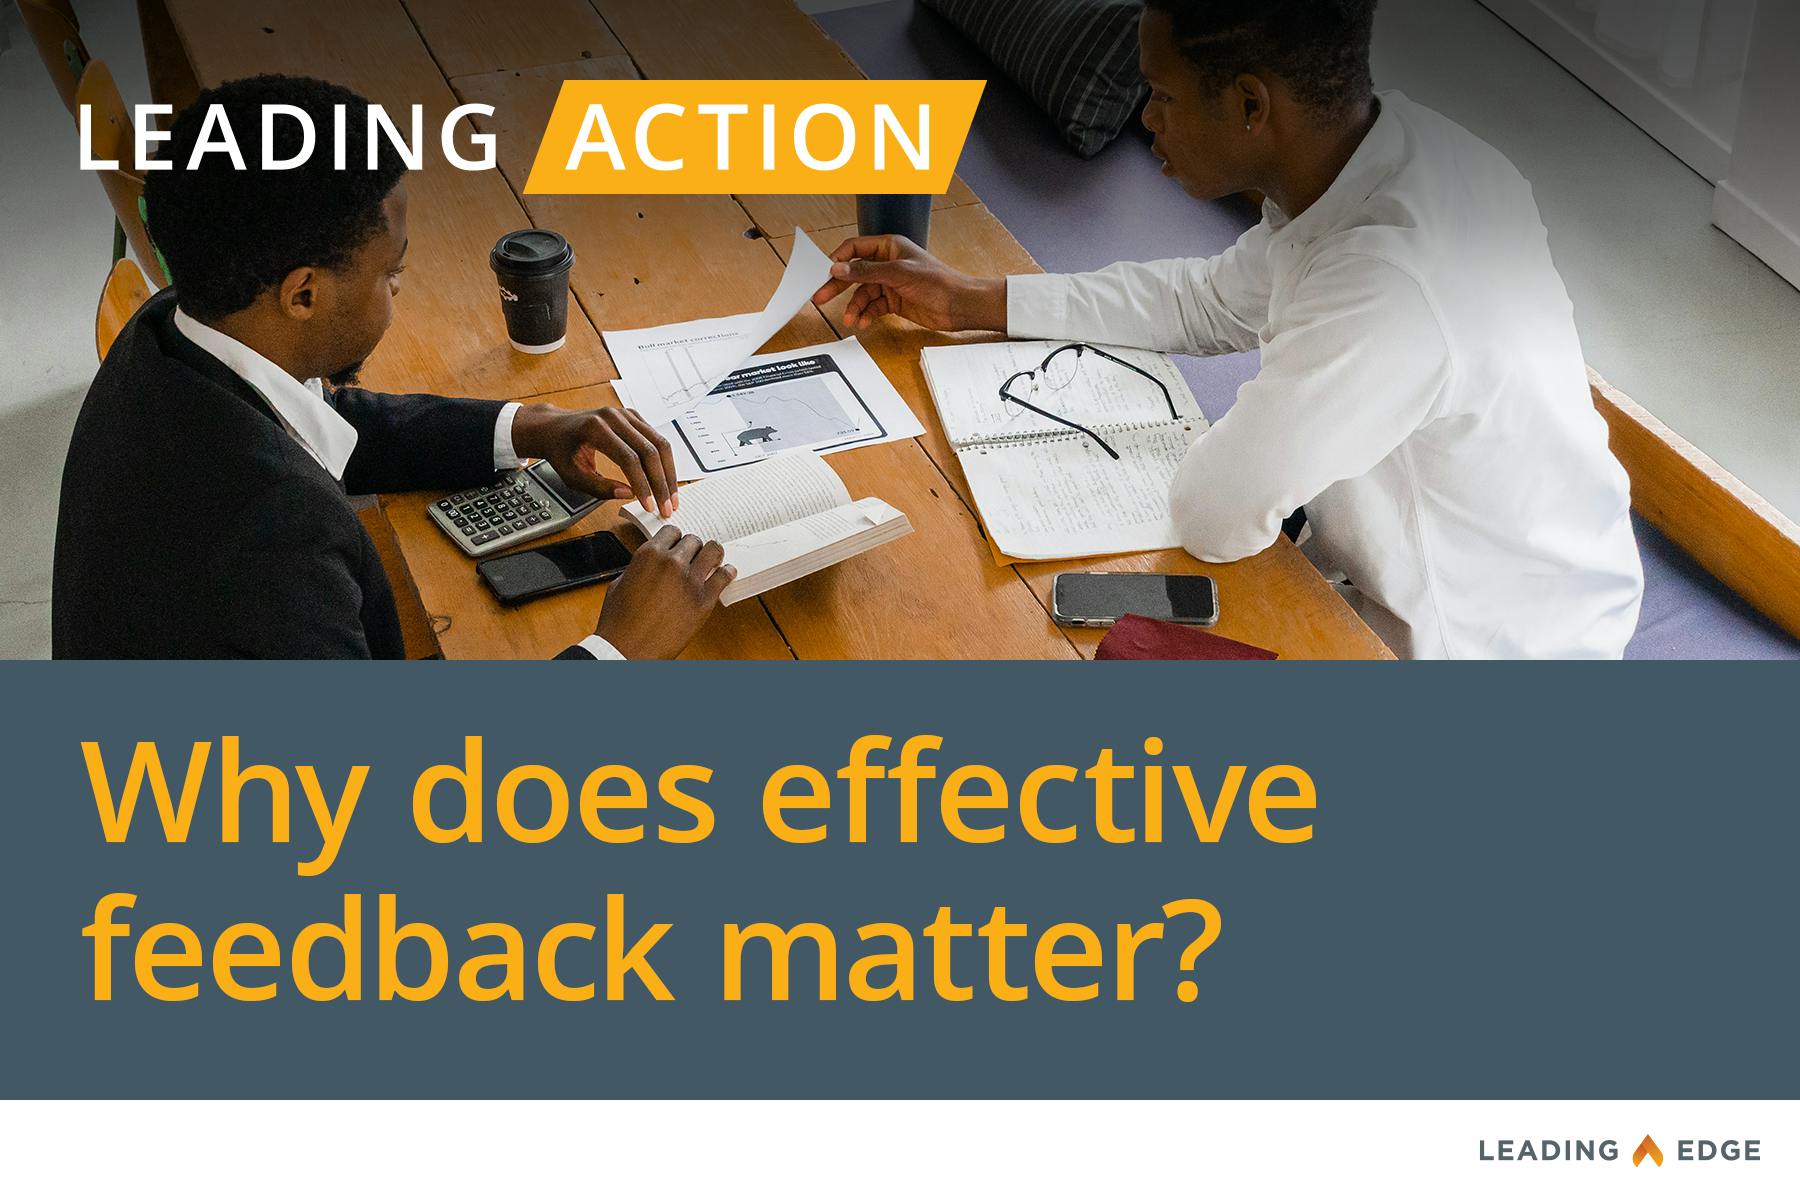 Leading Action: Why does effective feedback matter?